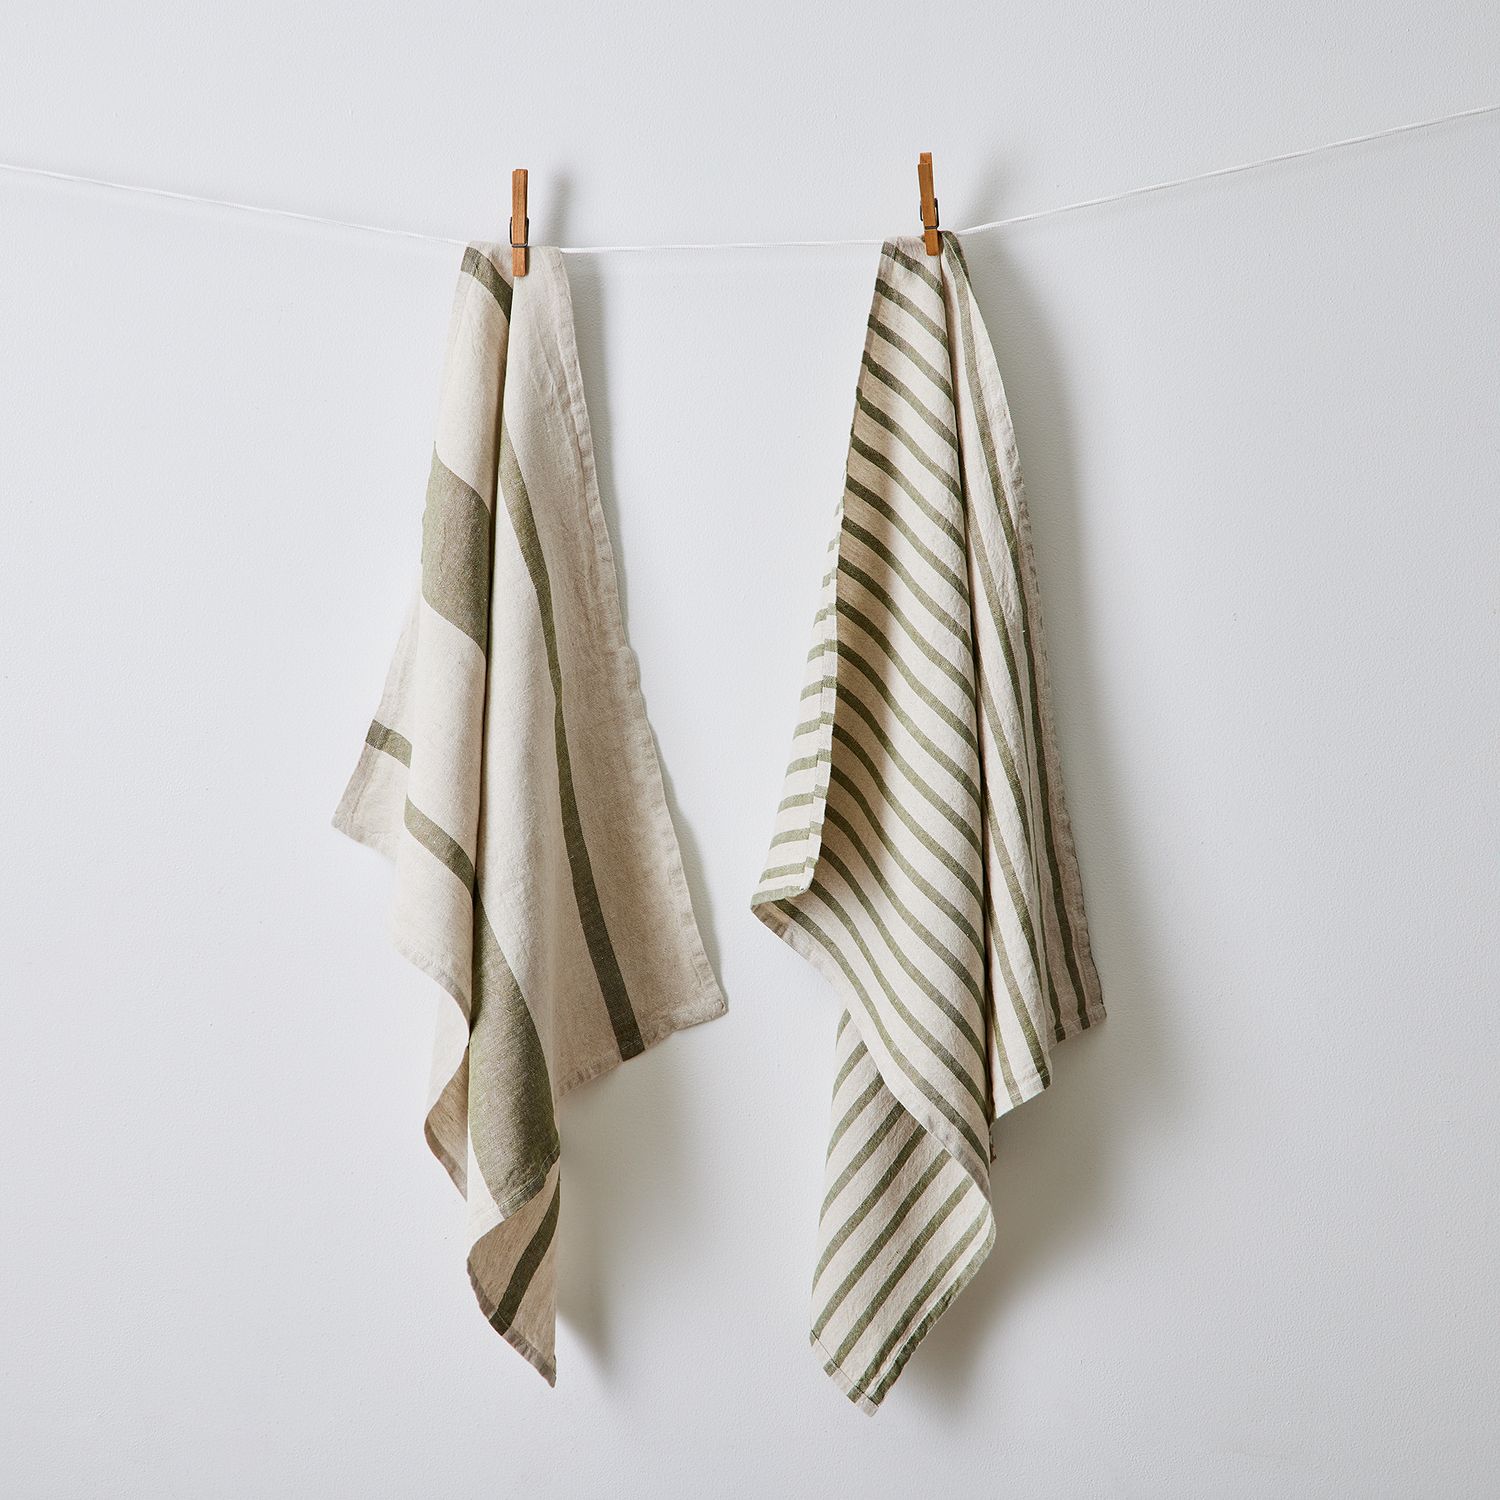 Thick and Durable linen tea towels, set of 4 dish towels - Linenbee